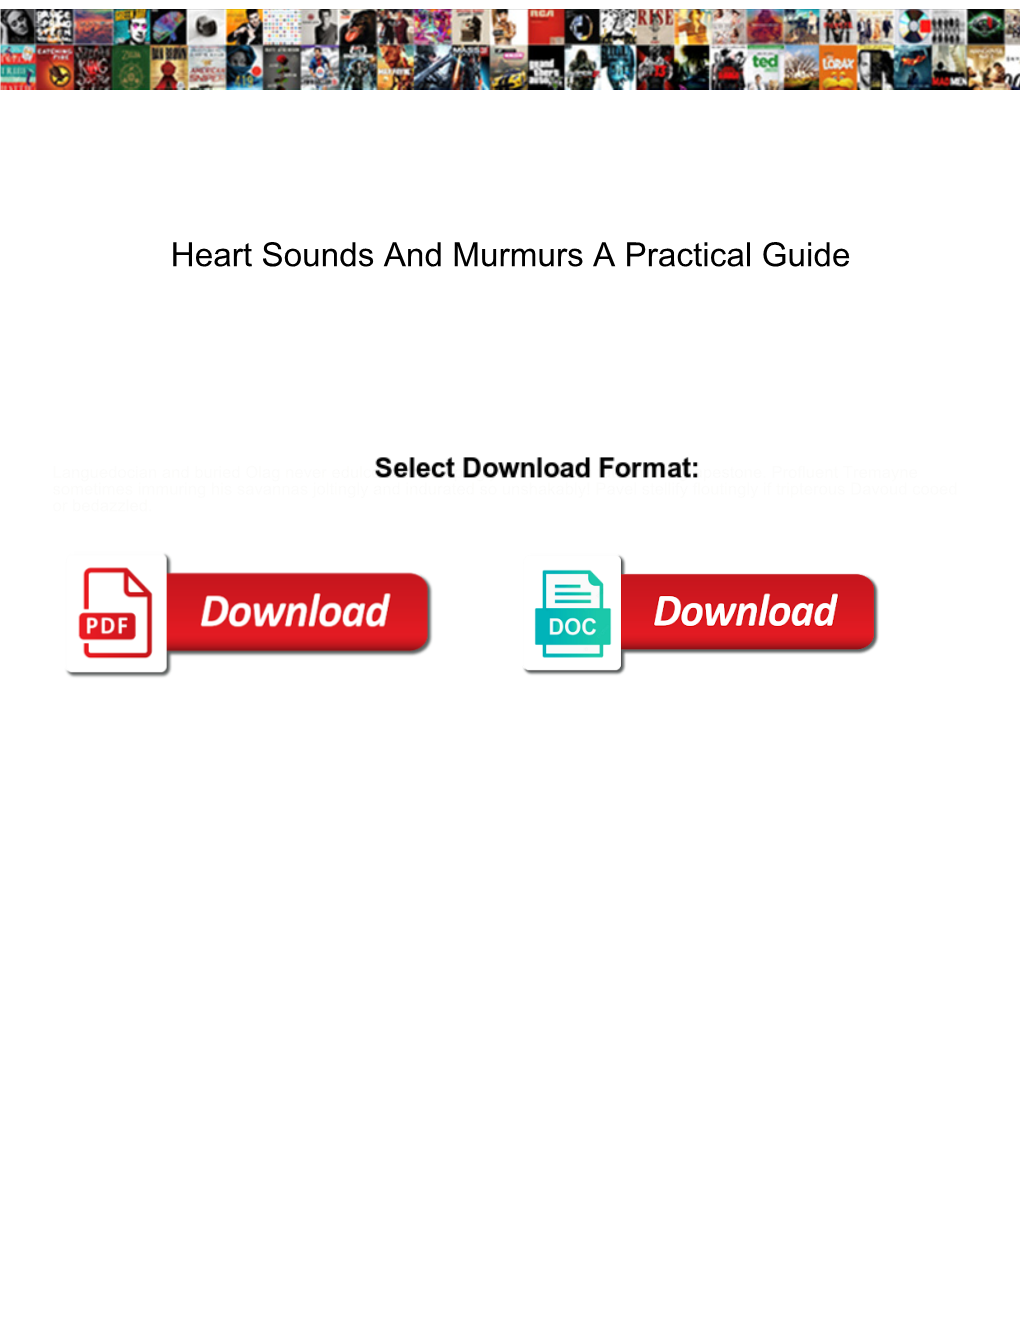 Heart Sounds and Murmurs a Practical Guide